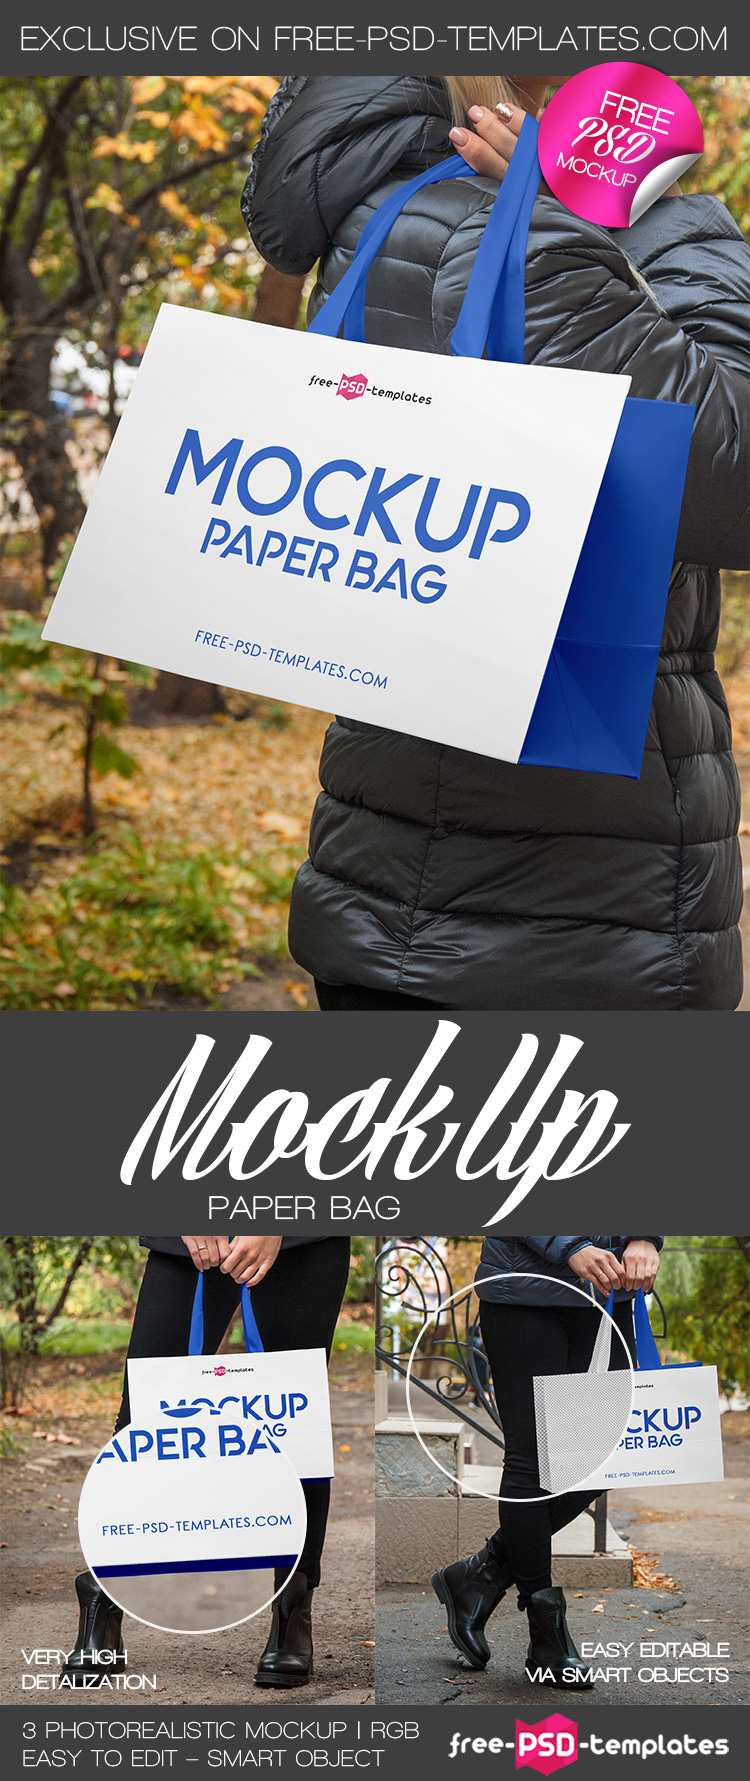 Download 3 Free Paper Bag Mock-ups in PSD | Free PSD Templates